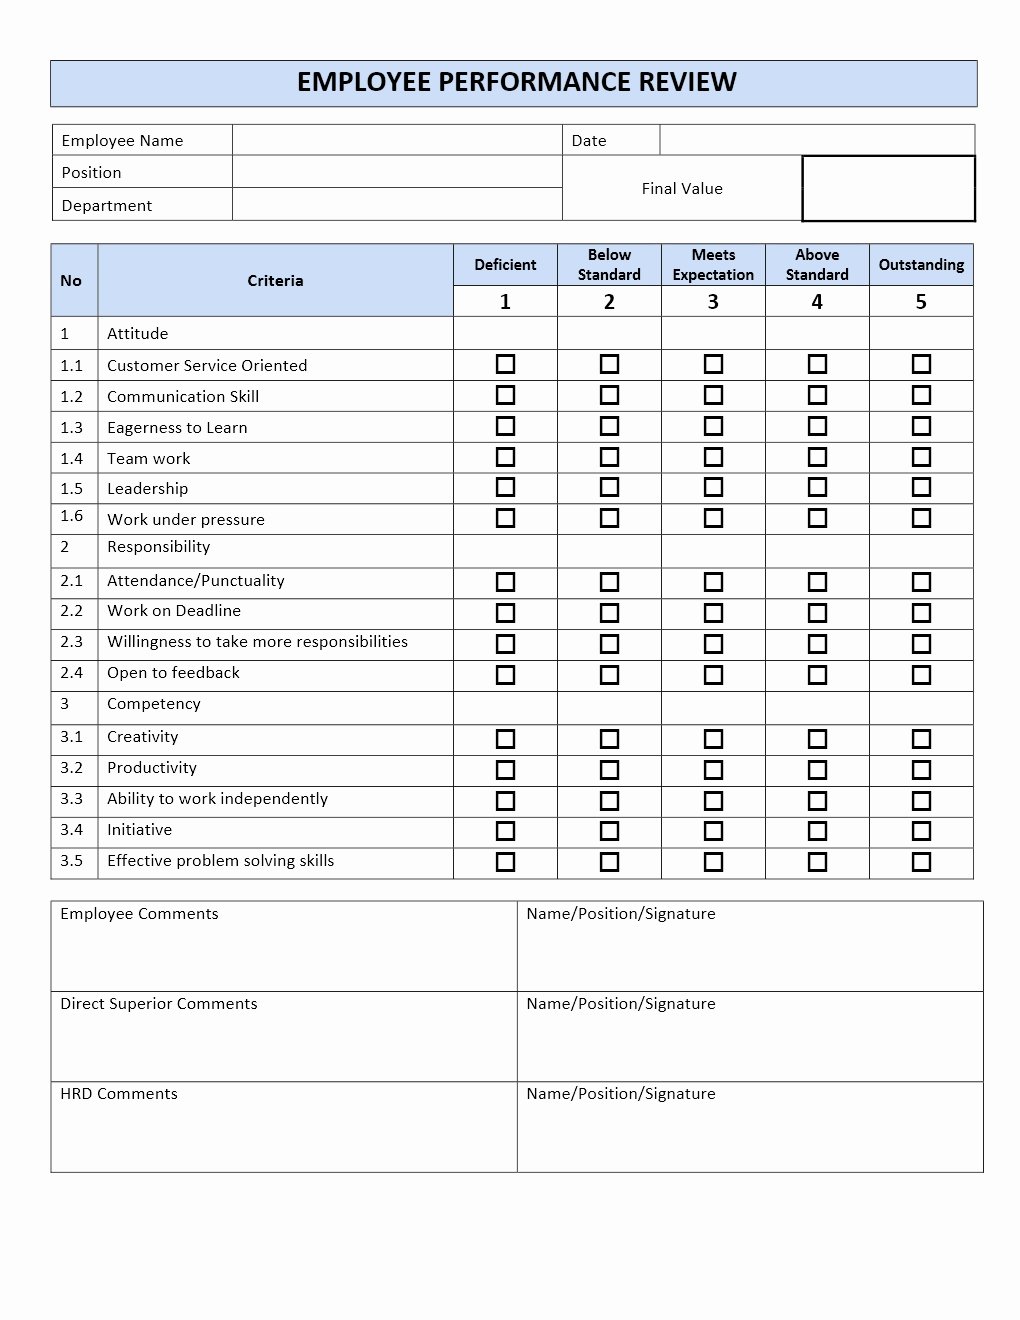 Employee Performance Review Template Word Fresh Employee Performance Review form